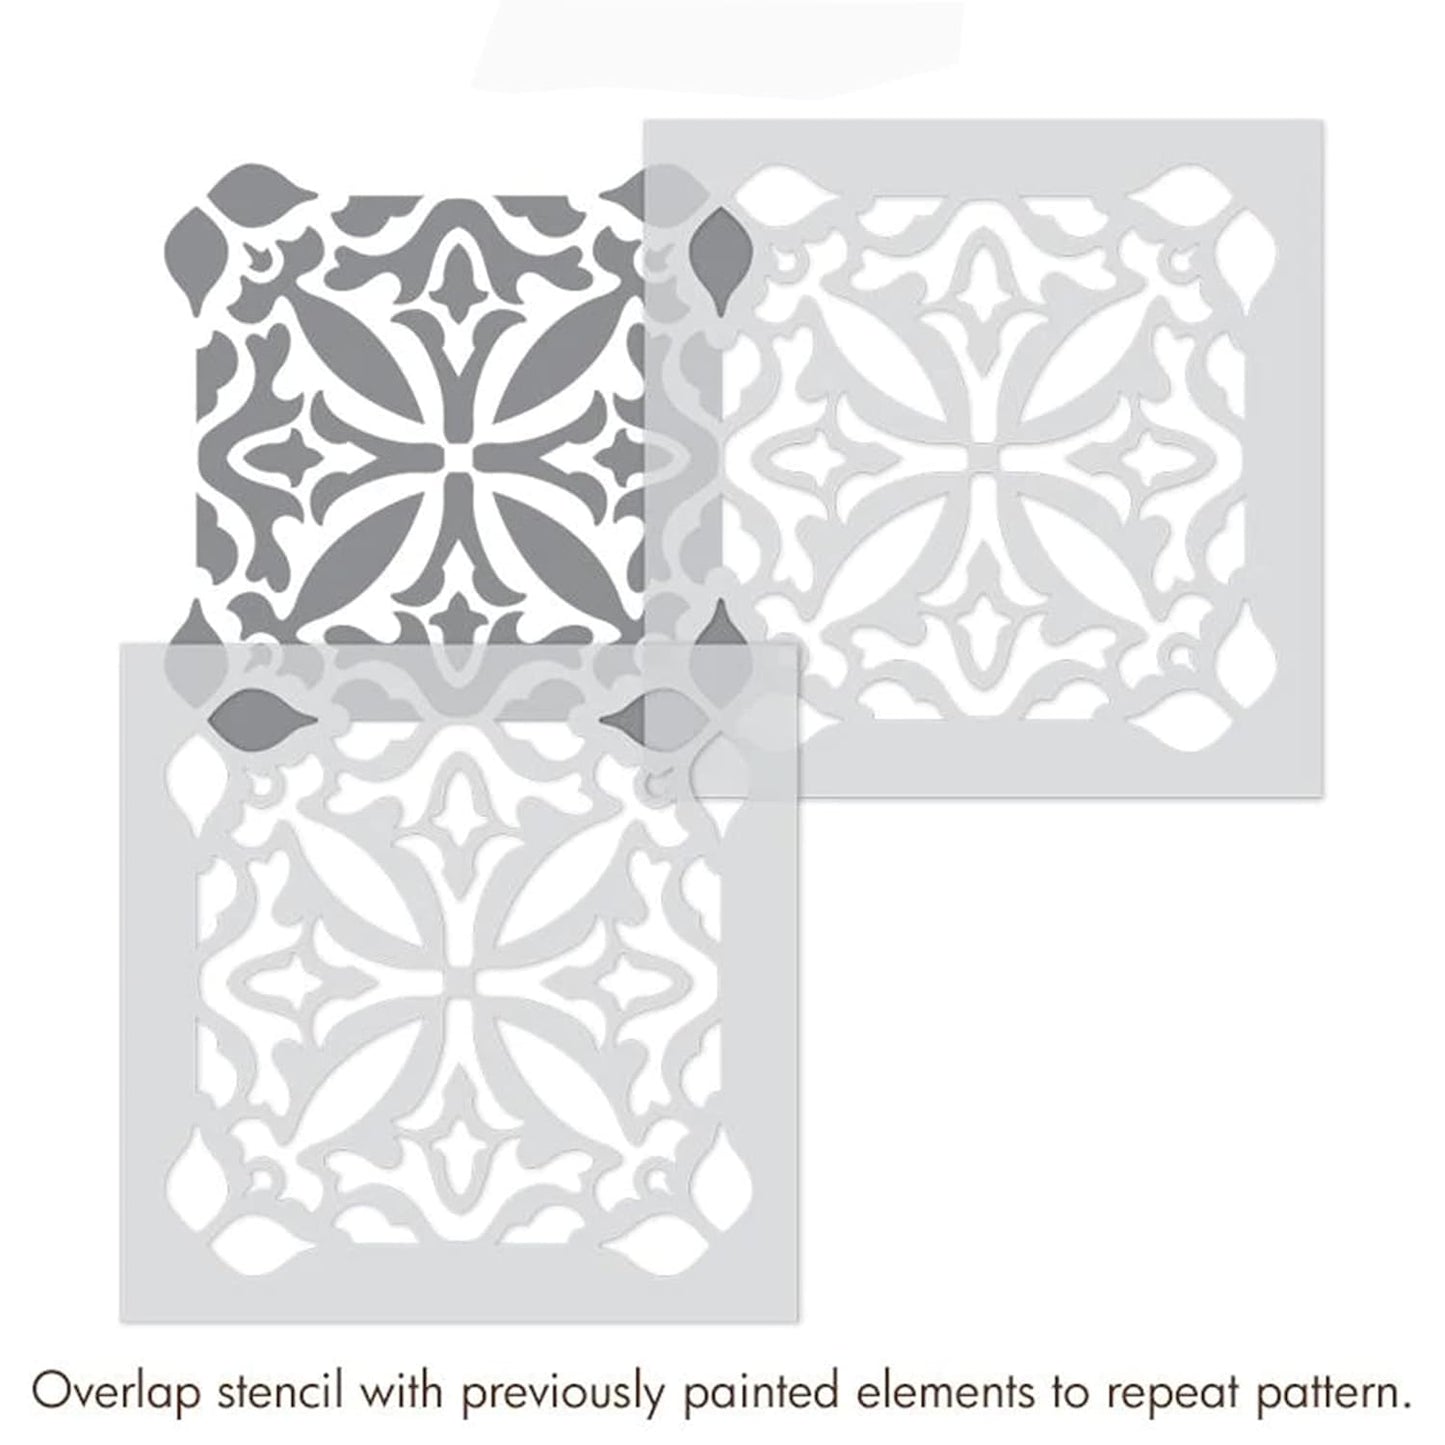 Latest Enclave Allover Stencils for Wall Painting - (KDRDSS1144) Pack of 2